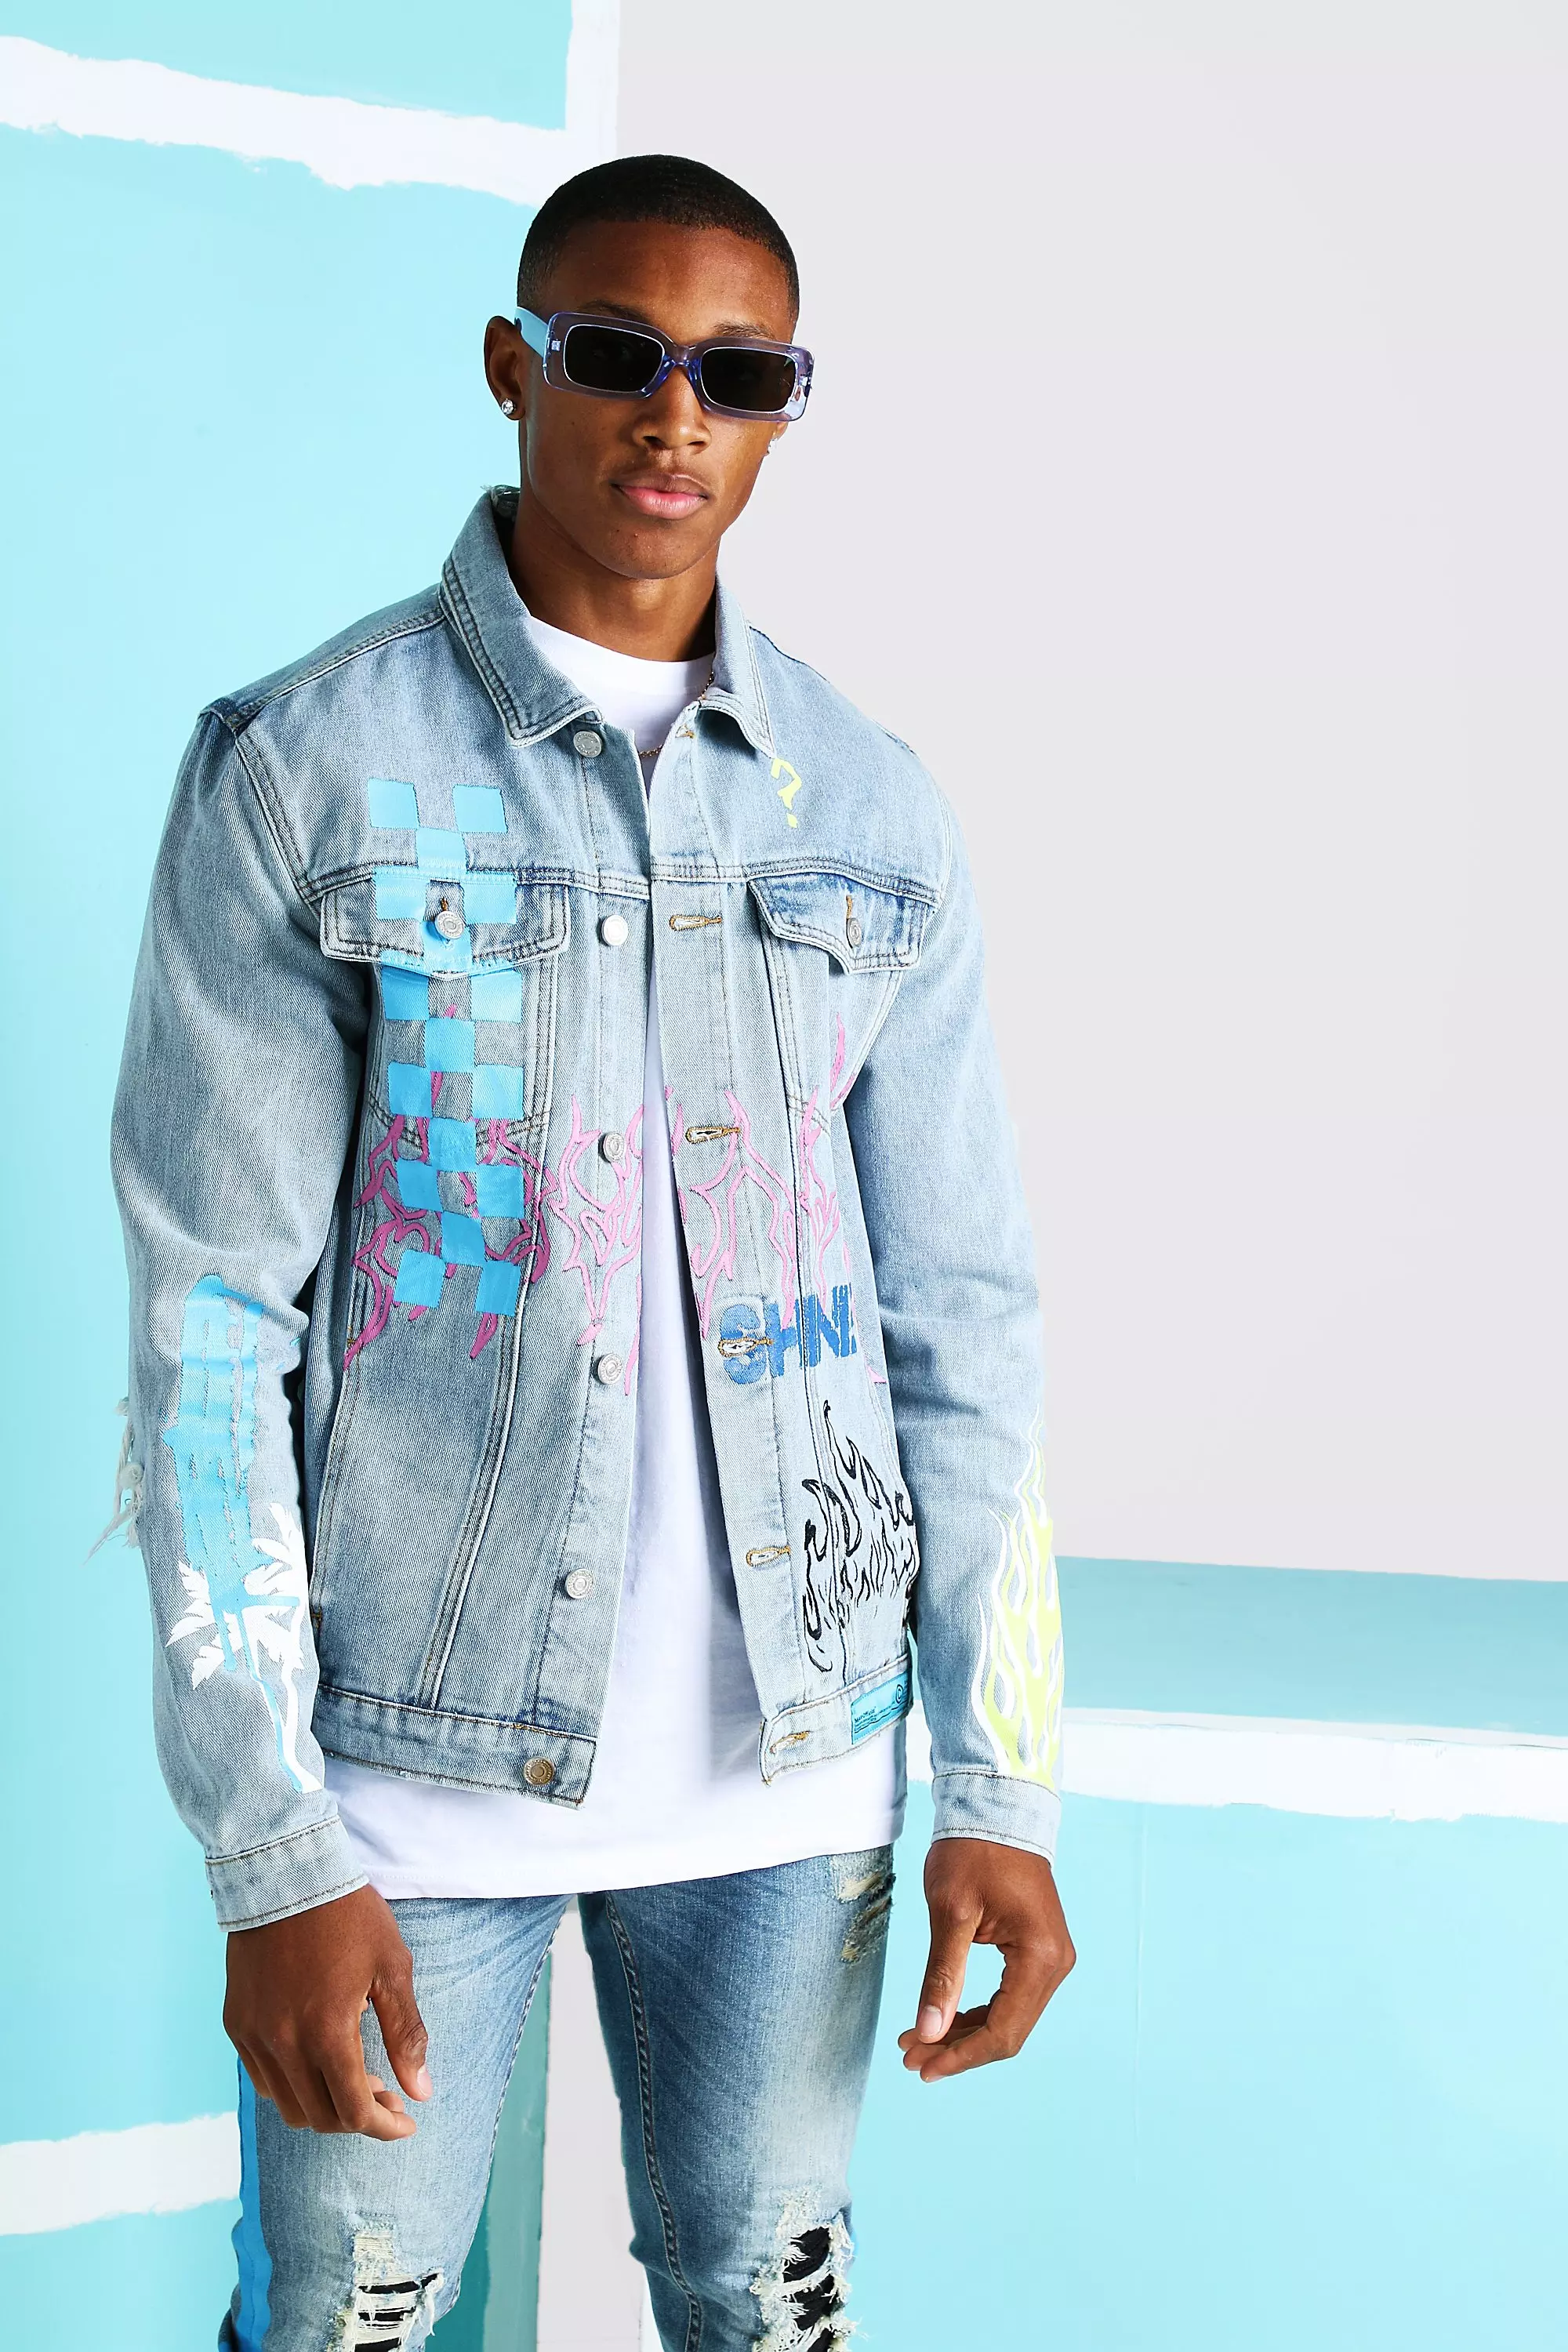 We11done - Graffiti Ver.2 All-over Print Denim Jacket  HBX - Globally  Curated Fashion and Lifestyle by Hypebeast